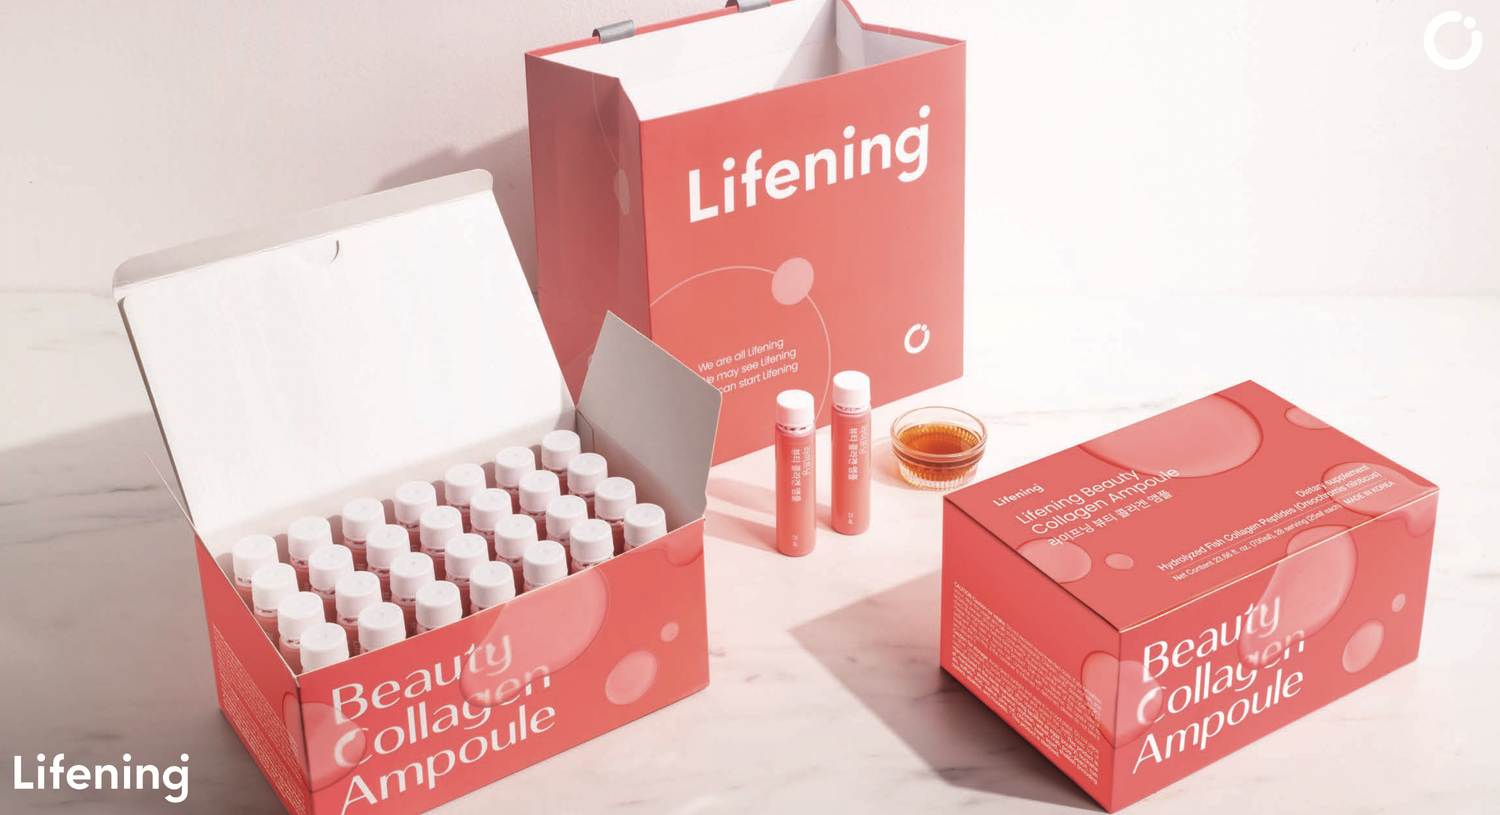 Introducing Lifening Beauty Collagen EX: Your New Glow Starts Here!